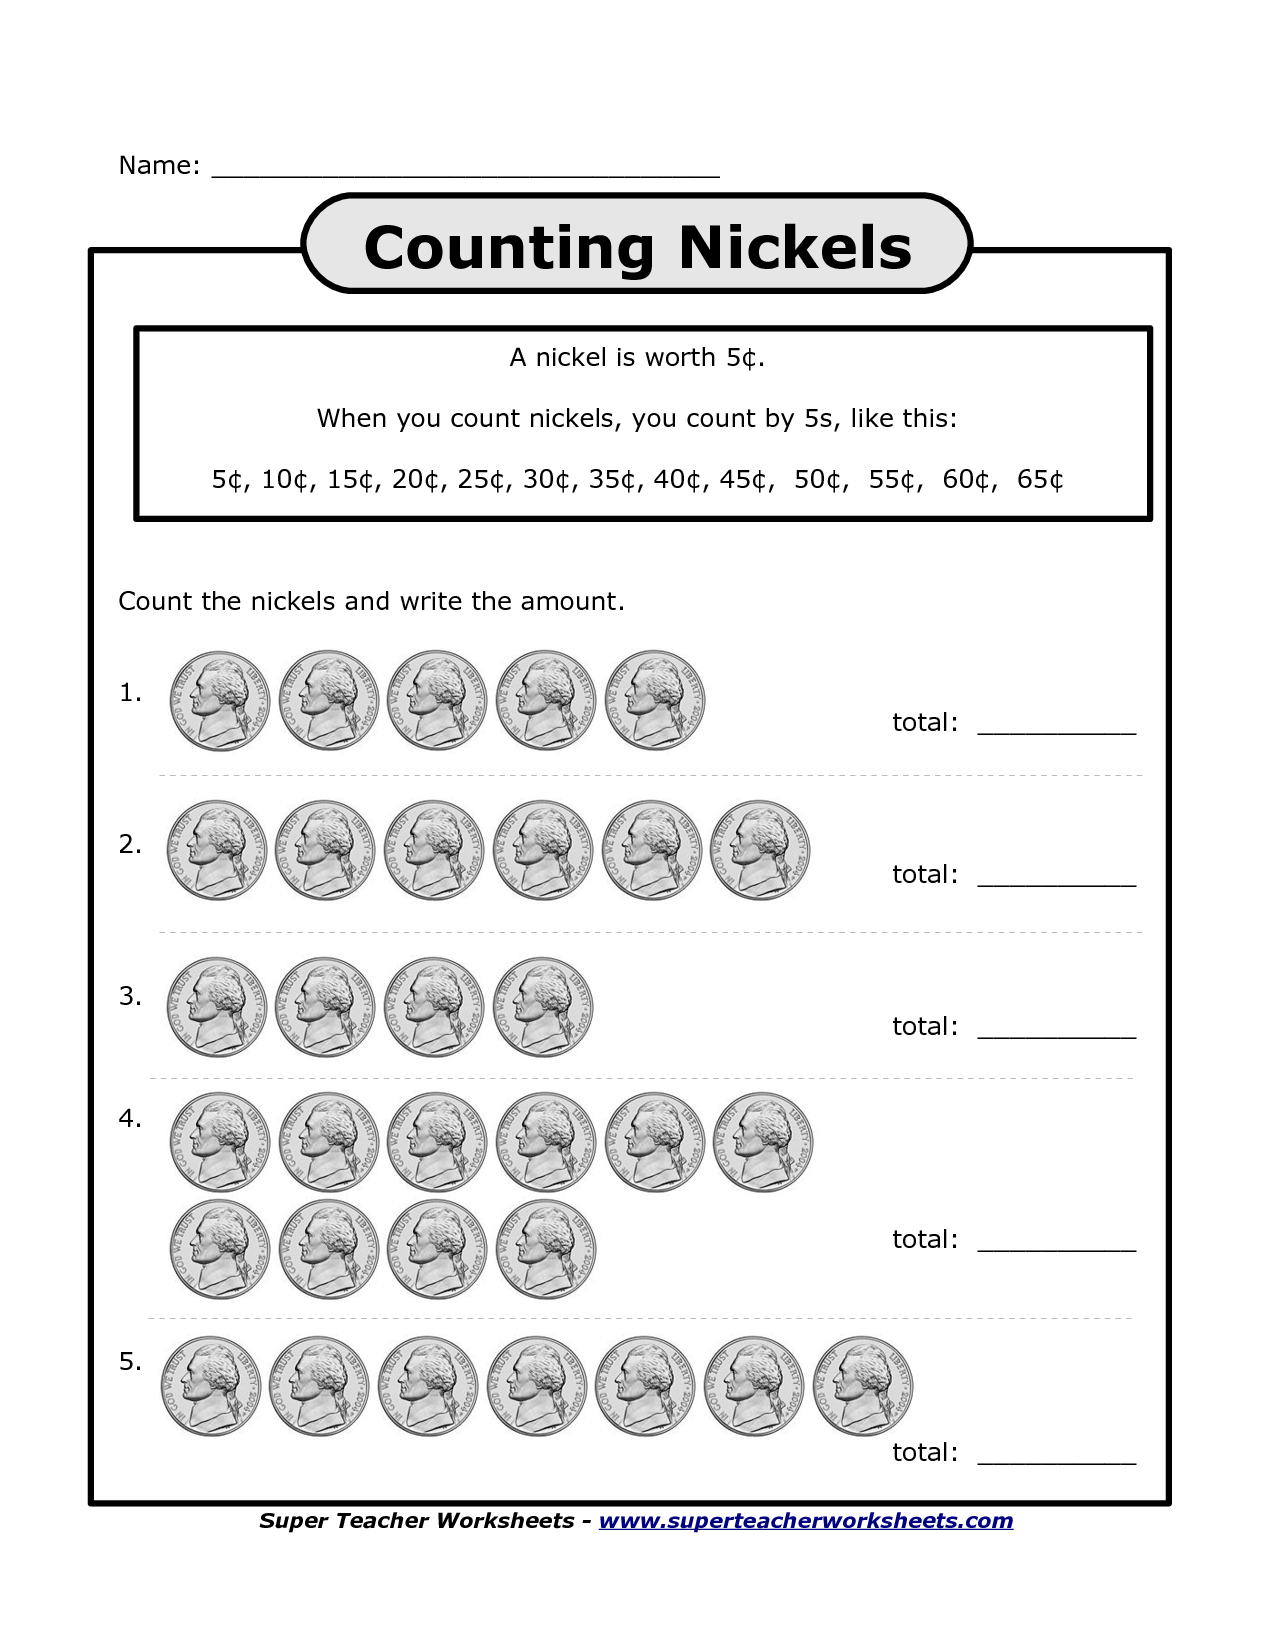 skill-wiring-counting-dimes-worksheet